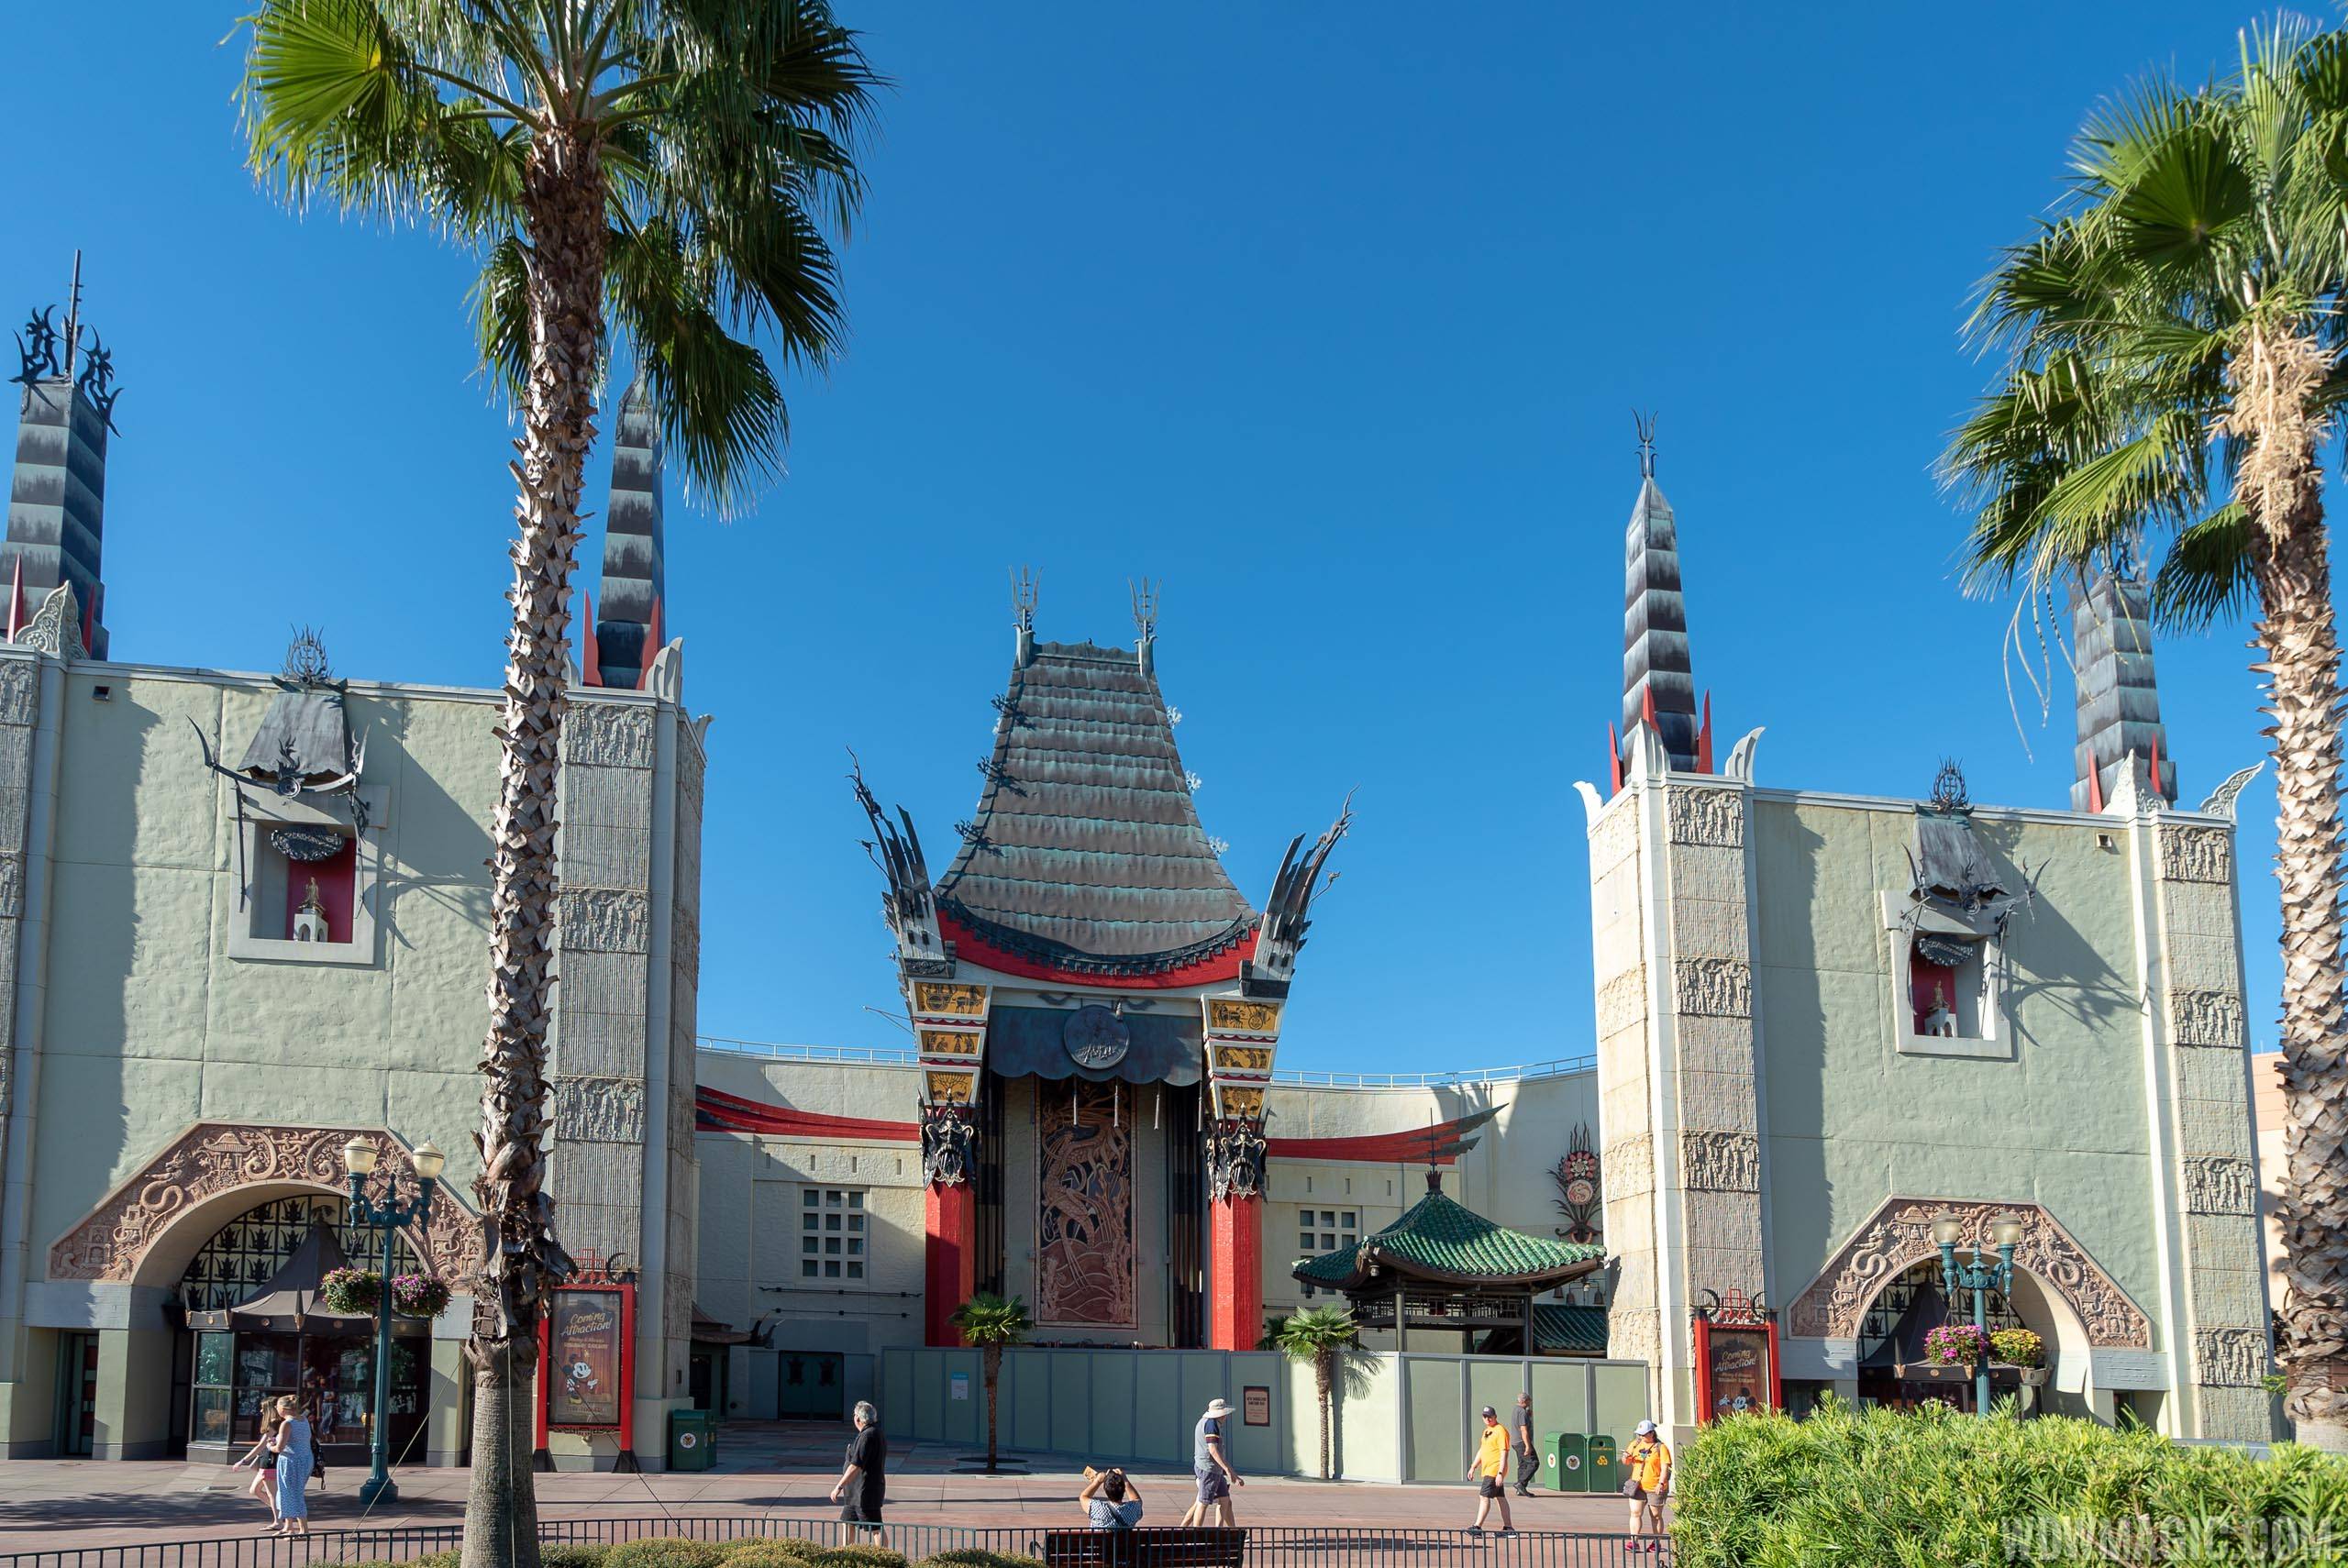 PHOTOS - Exterior work on the Chinese Theater ahead of Mickey and Minnie's Runaway Railway